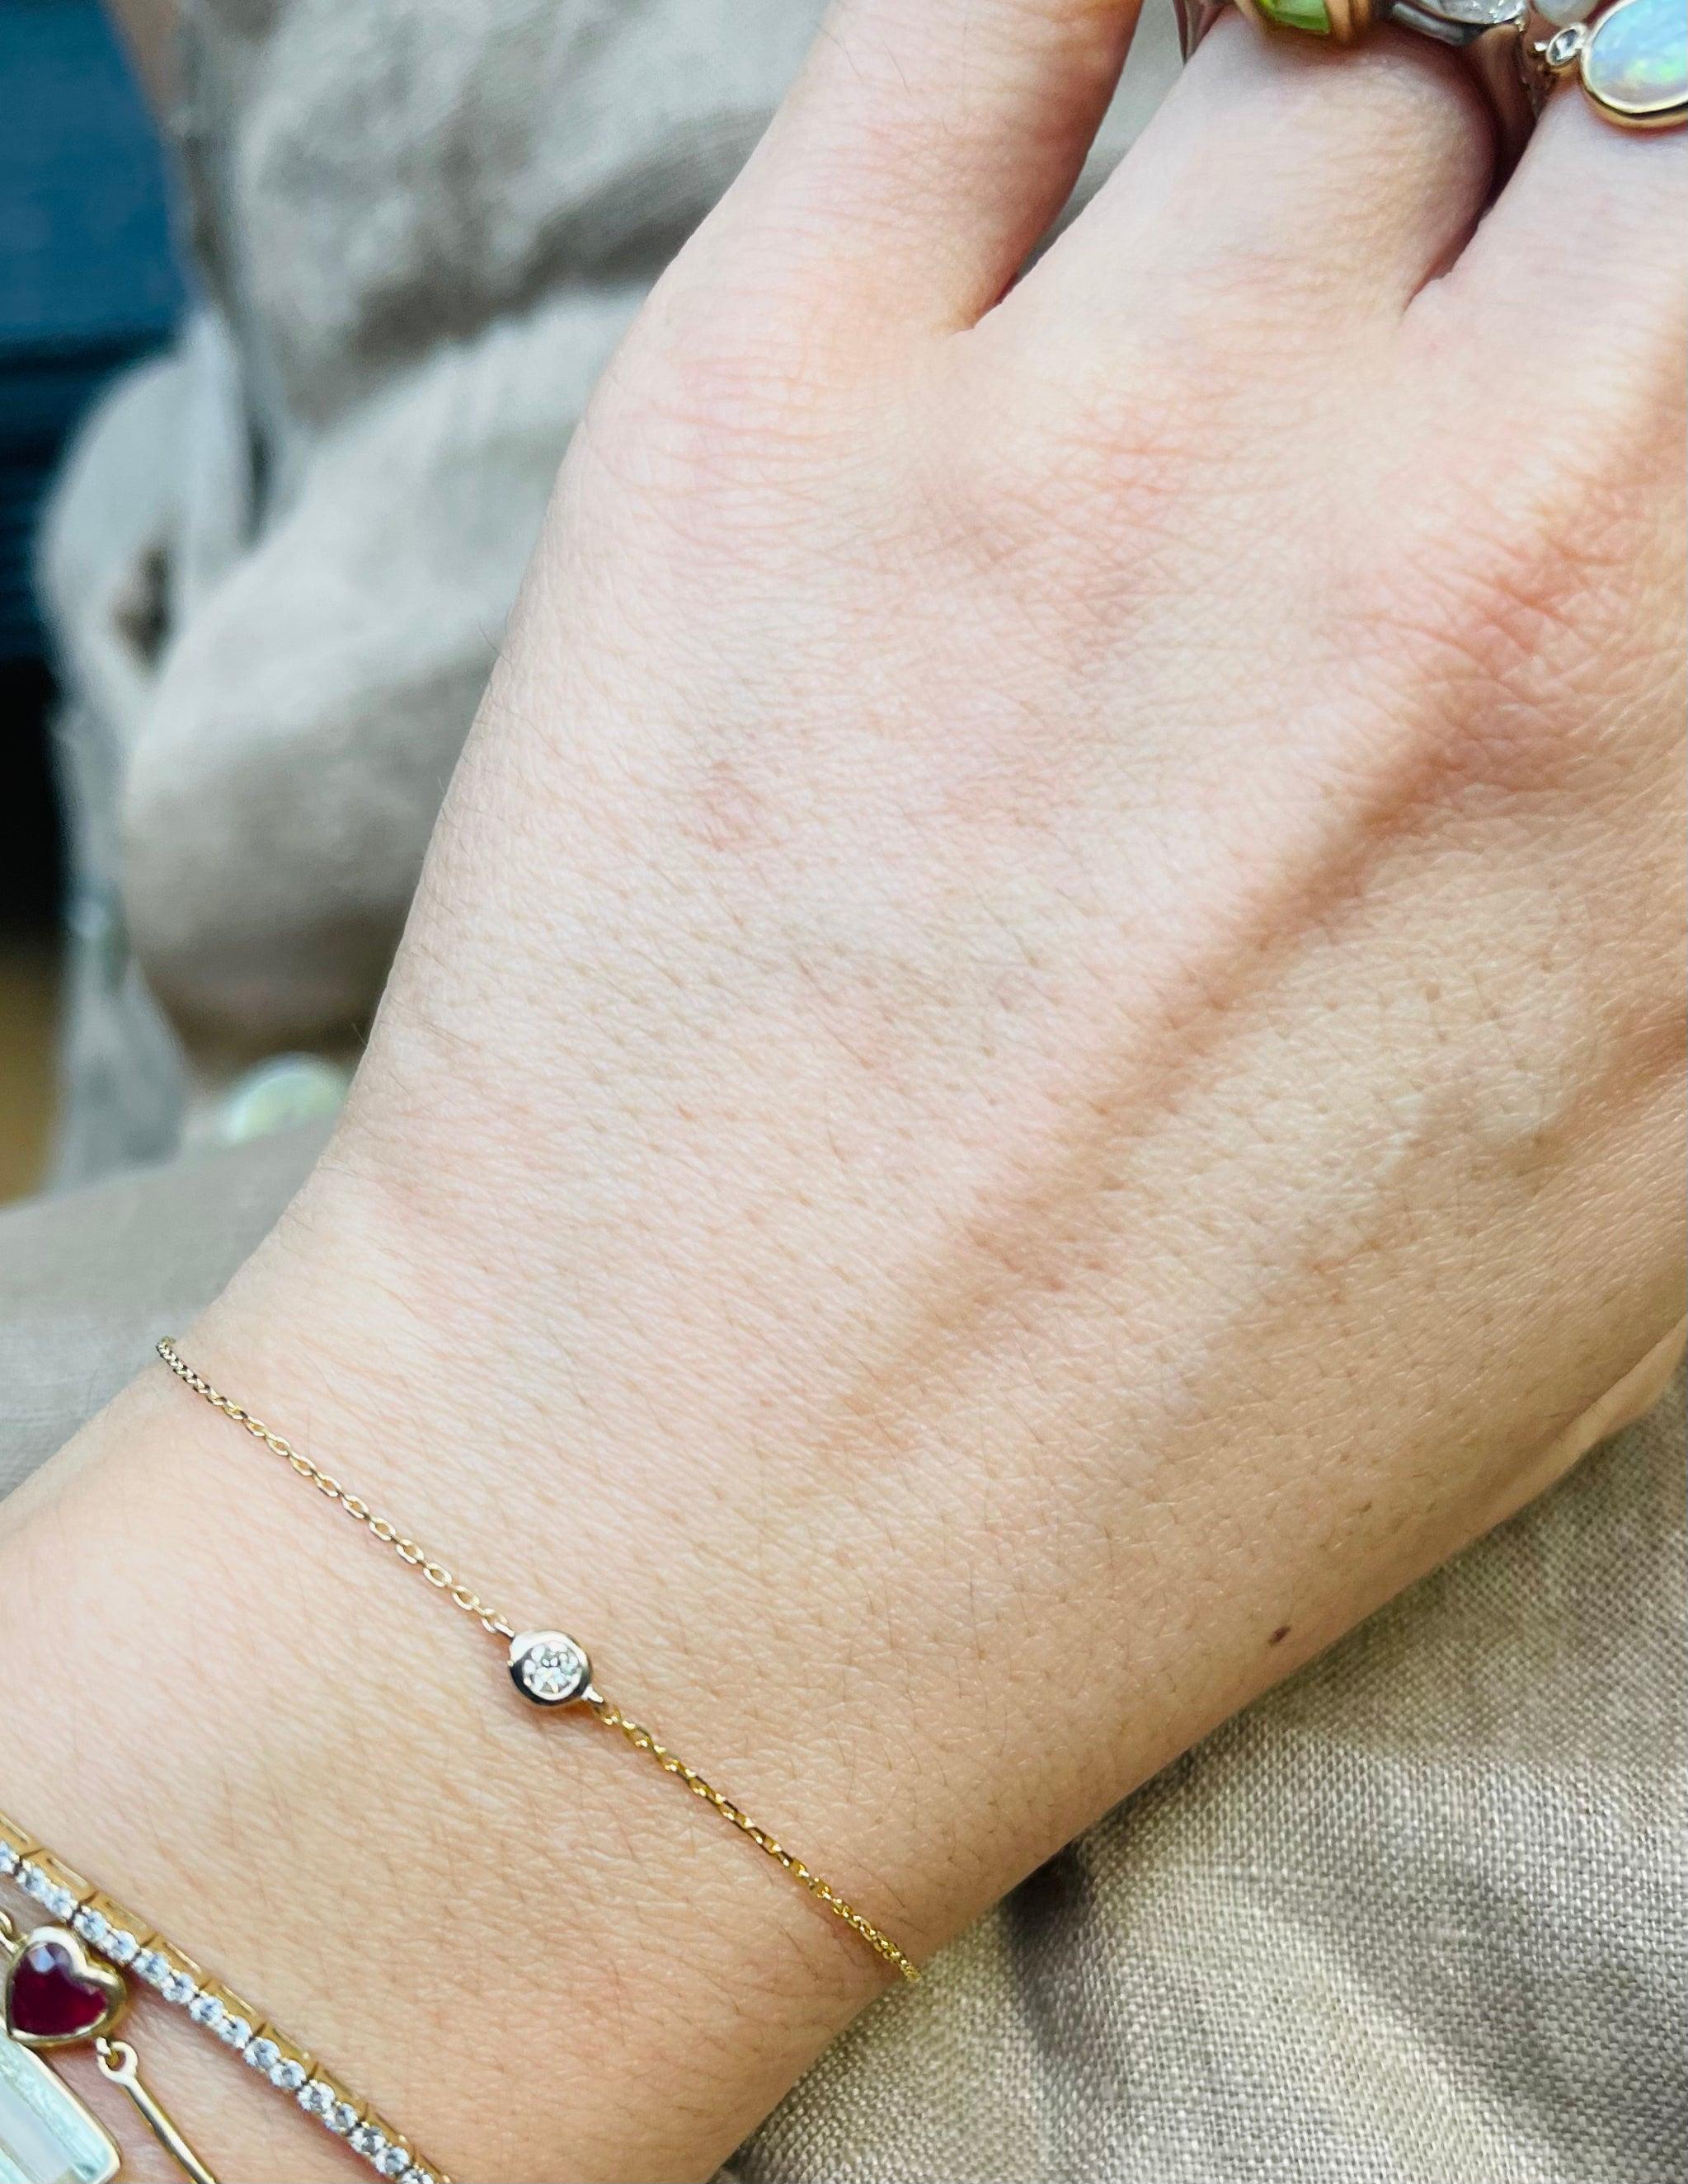 She’s as cute as a button! This perfectly versatile bracelet is the perfect addition to any wrists stack. Made in sold gold with a dazzling brilliant cut diamond, this bracelet is sure to charm any wearer. 


We made this cute little number to add